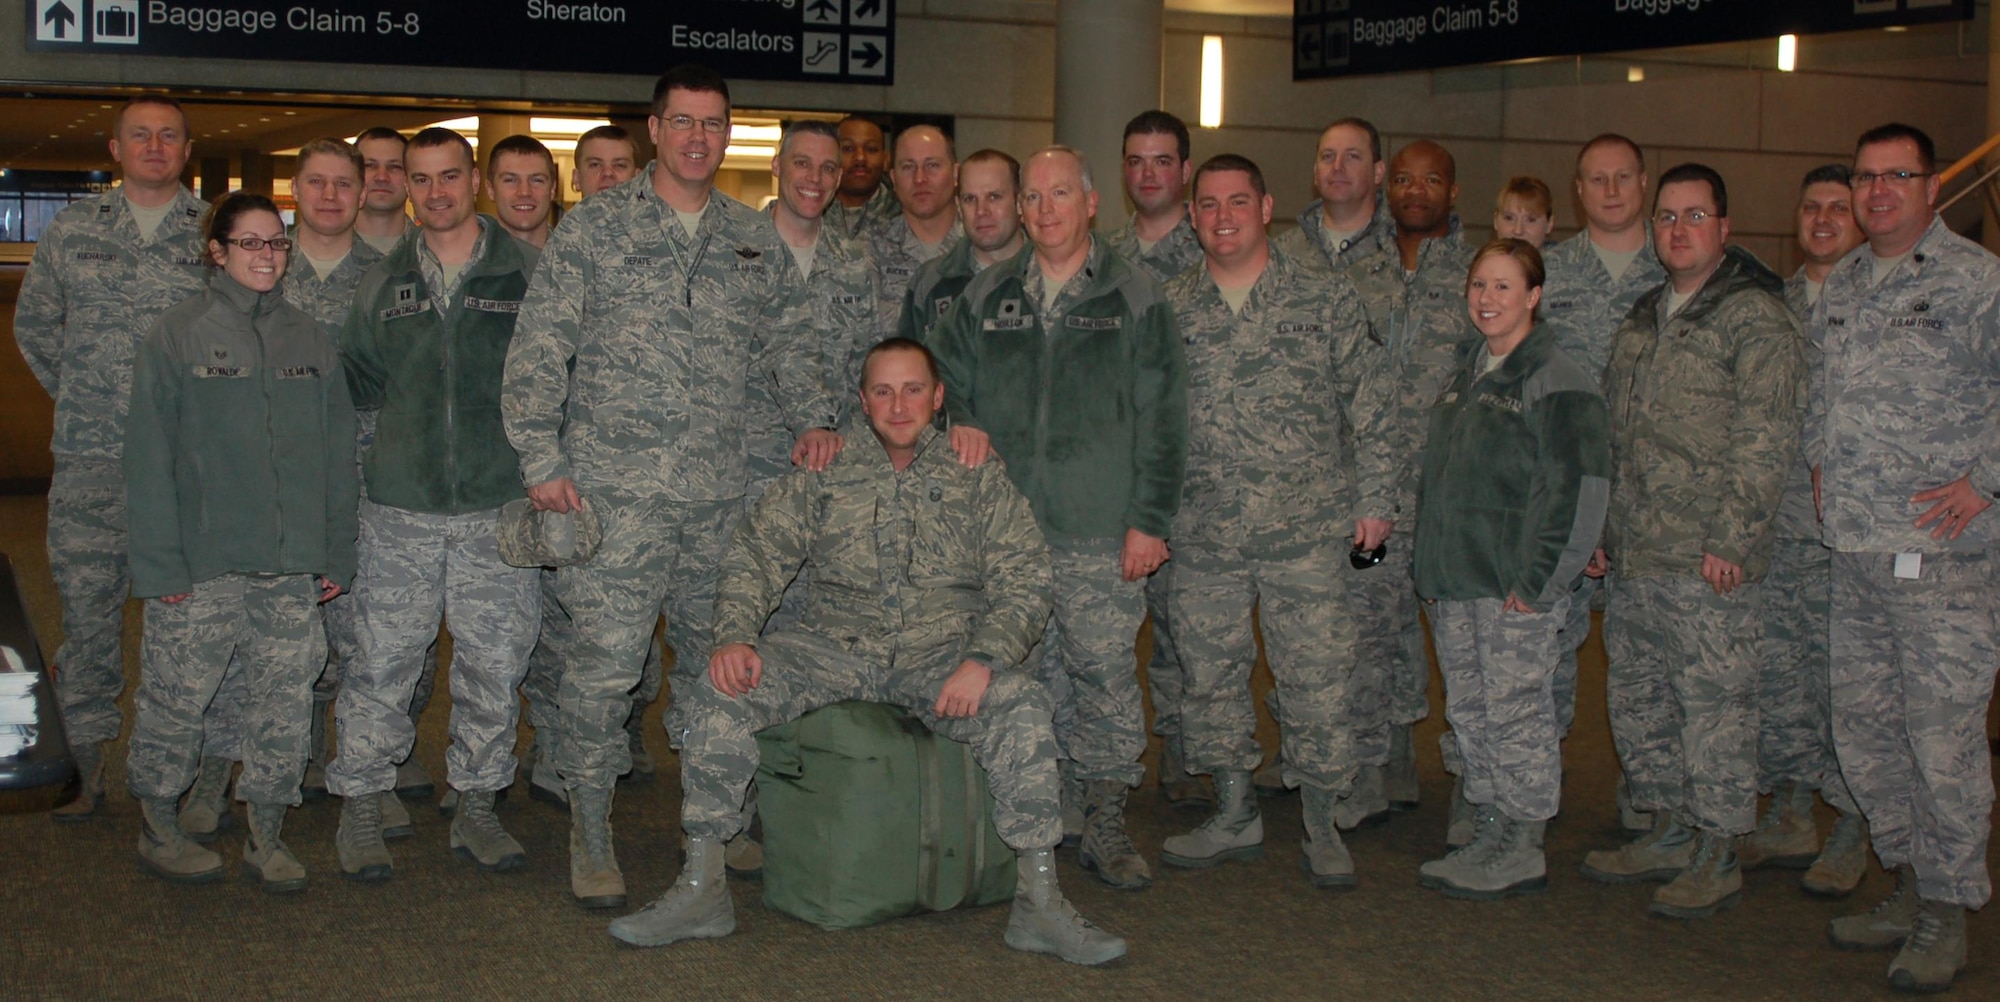 Master Sgt. Robert E. Bailey rests on his luggage and is surrounded by fellow members of the 103rd Air Operations Group who welcomed him home at Bradley International Airport Feb. 10, 2012, following an seven-month deployment to the Combined Air and Space Operations Center in Southwest Asia where he served as the Superintendent of the Targeting and Imagery Support Element. While deployed, Bailey was recognized for his excellence and selected to be the SNCO of the Year for the state of Connecticut. (U.S. Air Force photo by Capt. Jefferson S. Heiland)